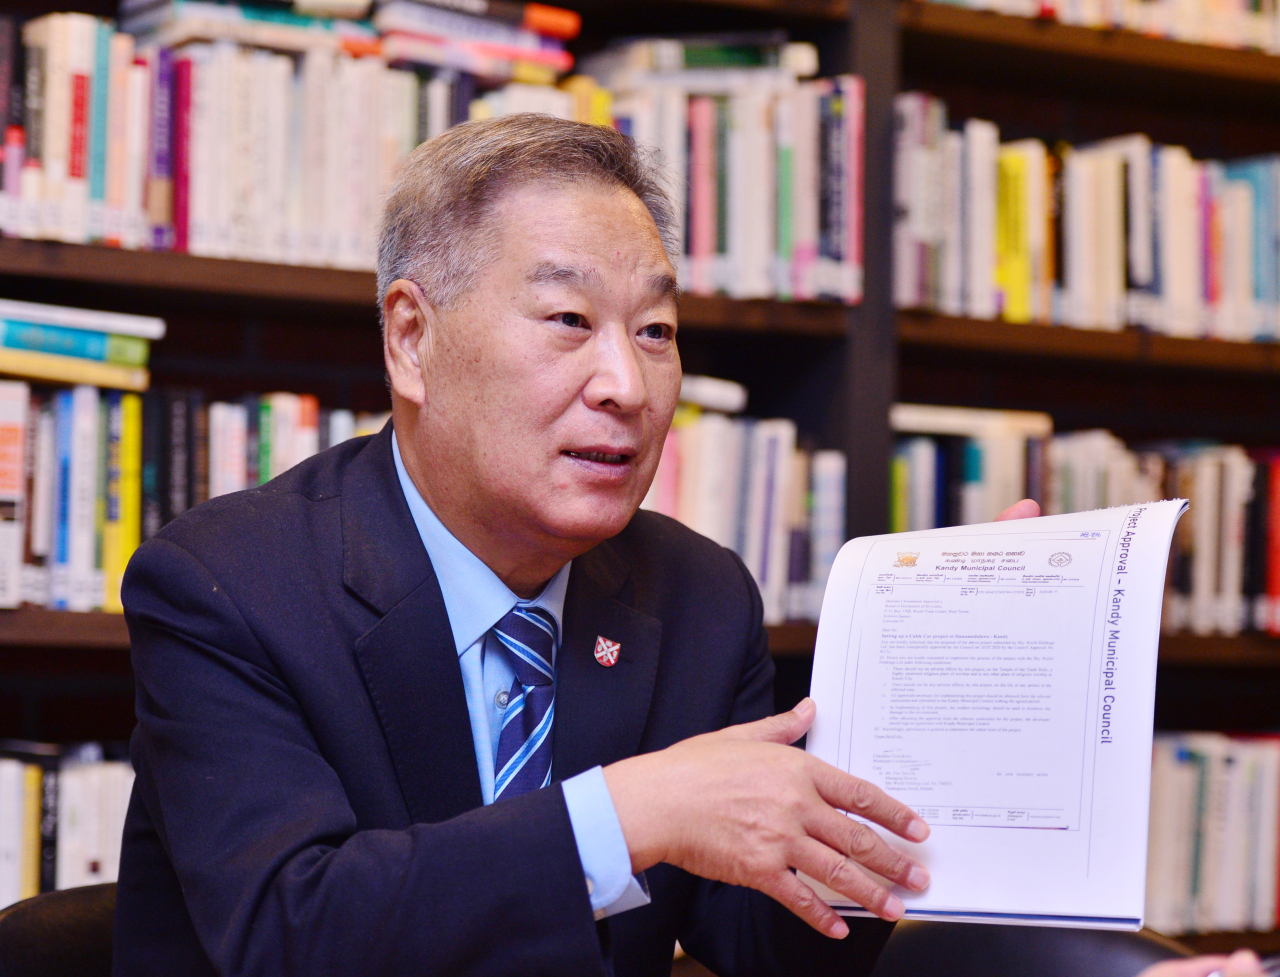 Sky Asia Chairman Yoo Sun-ha shows Kandy cable car project approval document in an interview with The Korea Herald in Seoul on Friday. (Park Hyun-koo/ The Korea Herald)